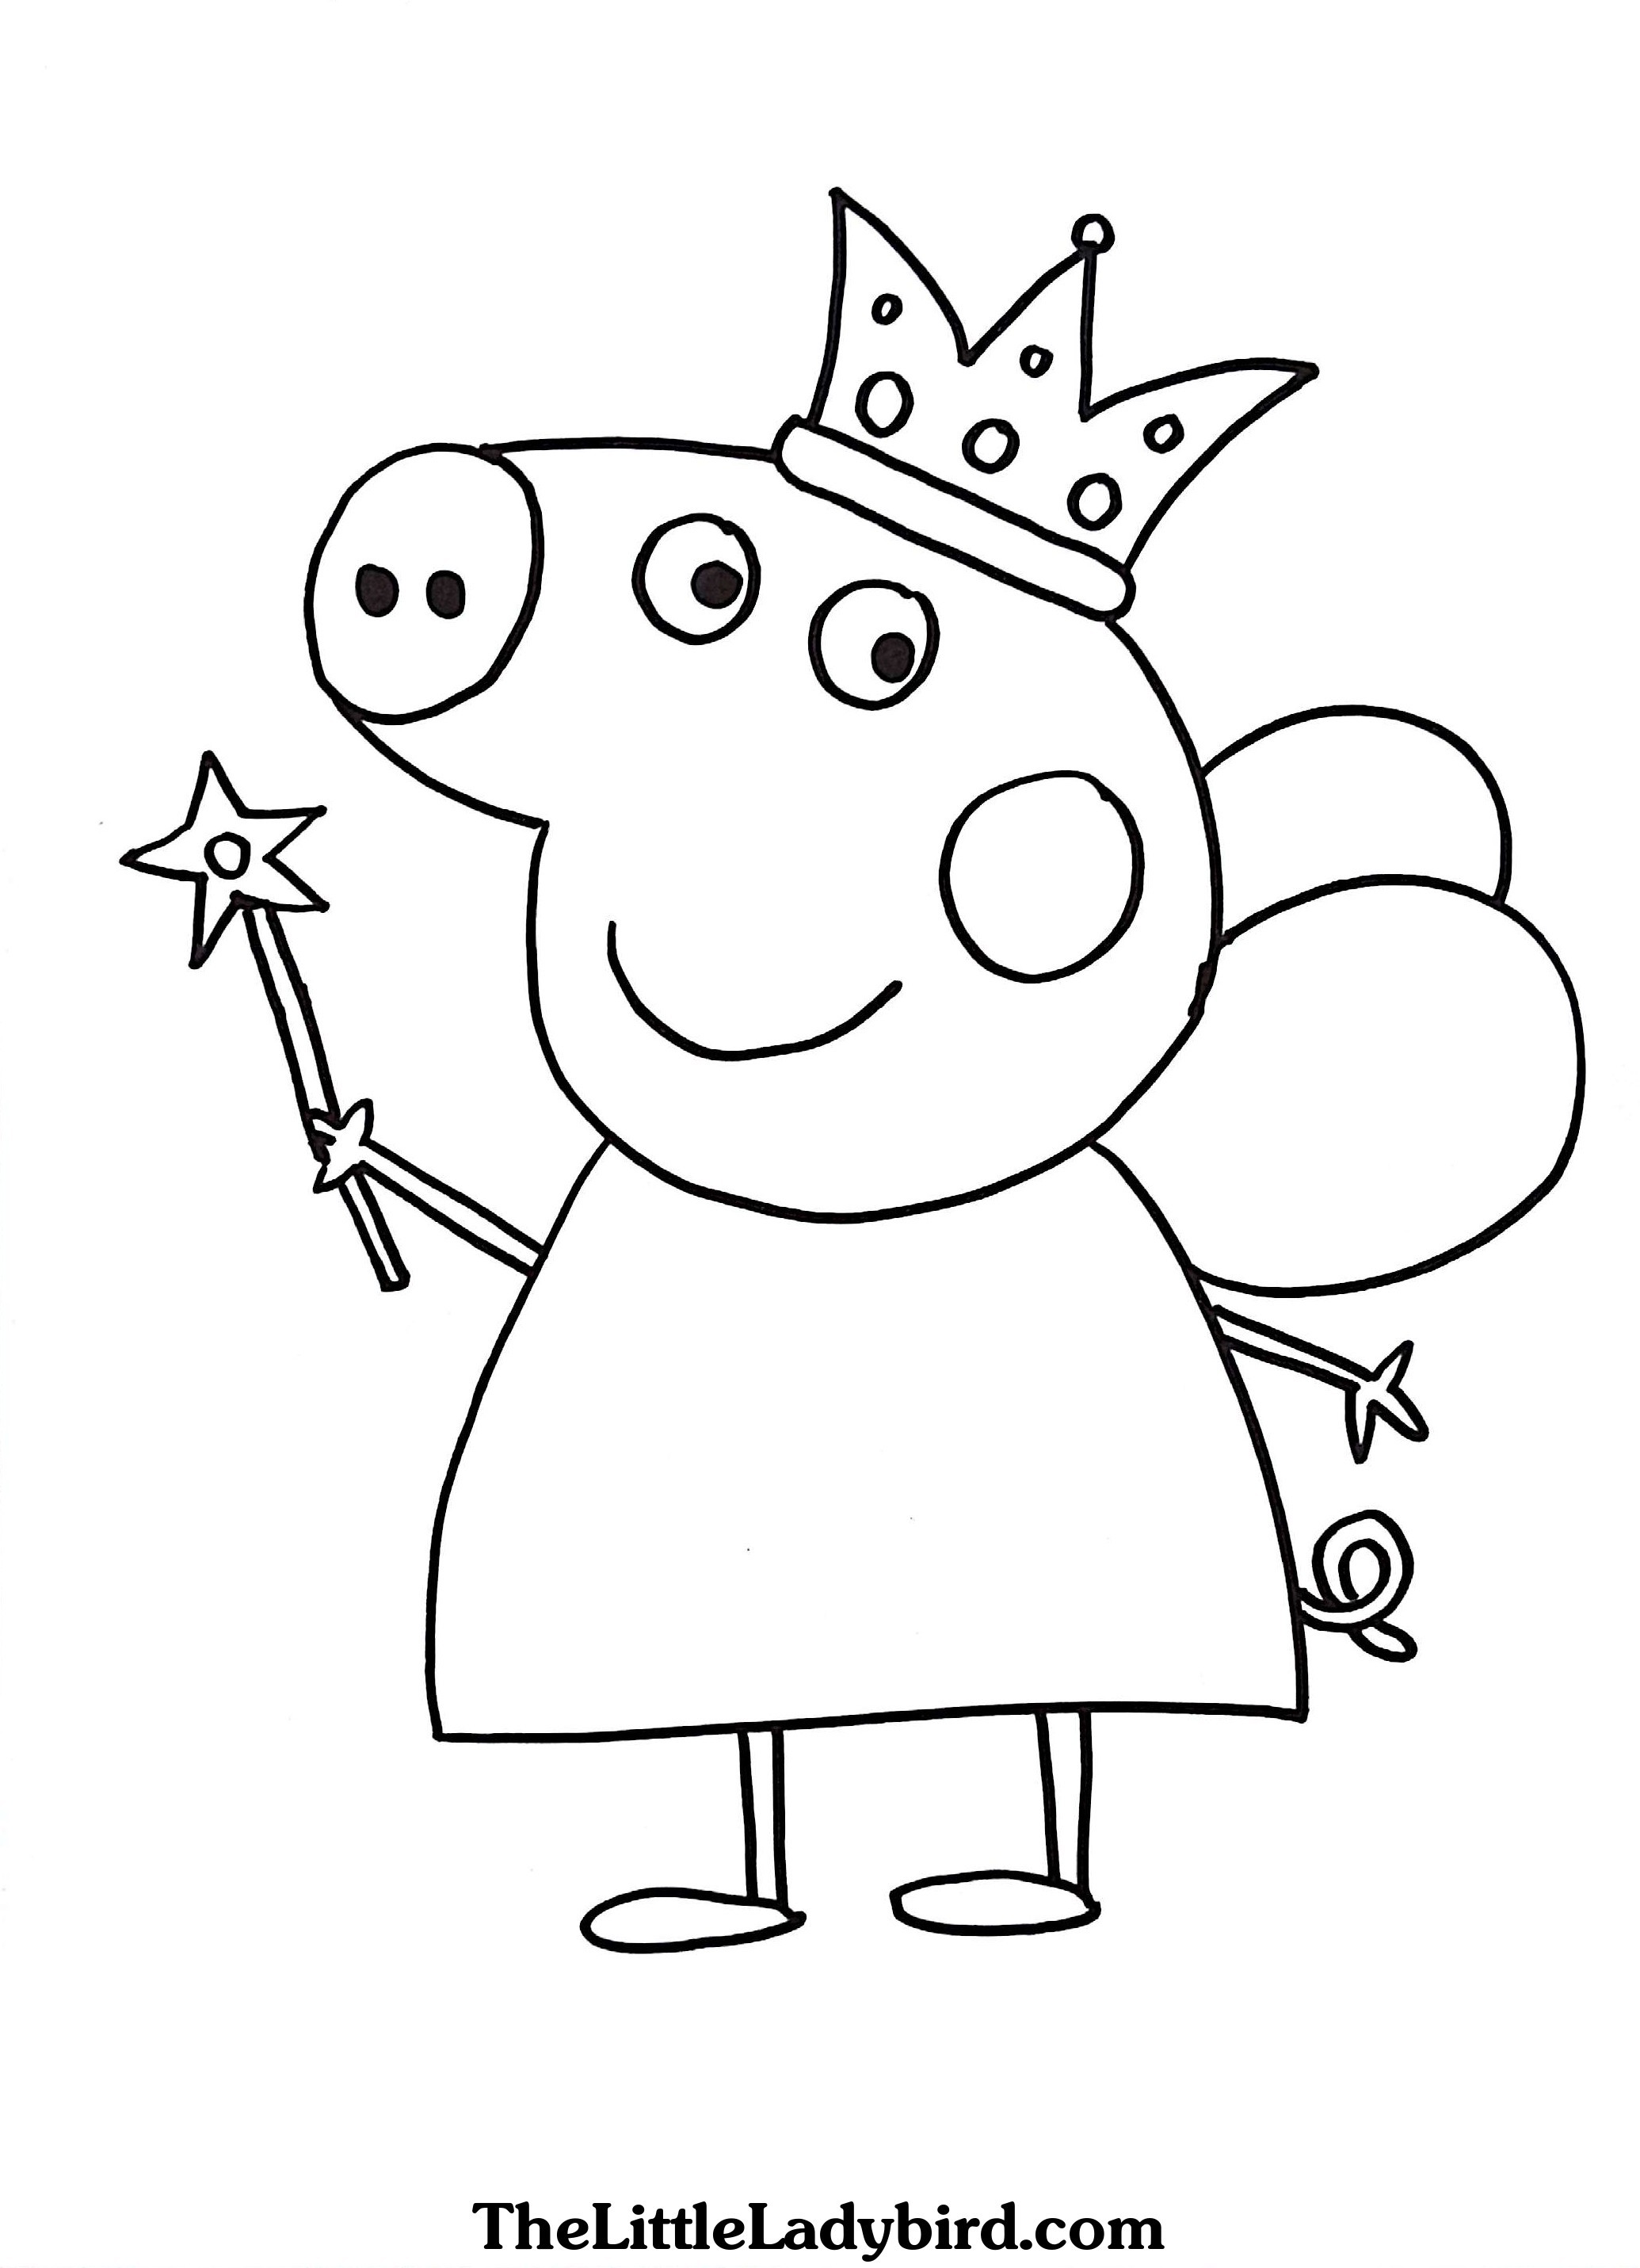 Peppa Pig George Coloring Pages at GetColorings.com | Free ...